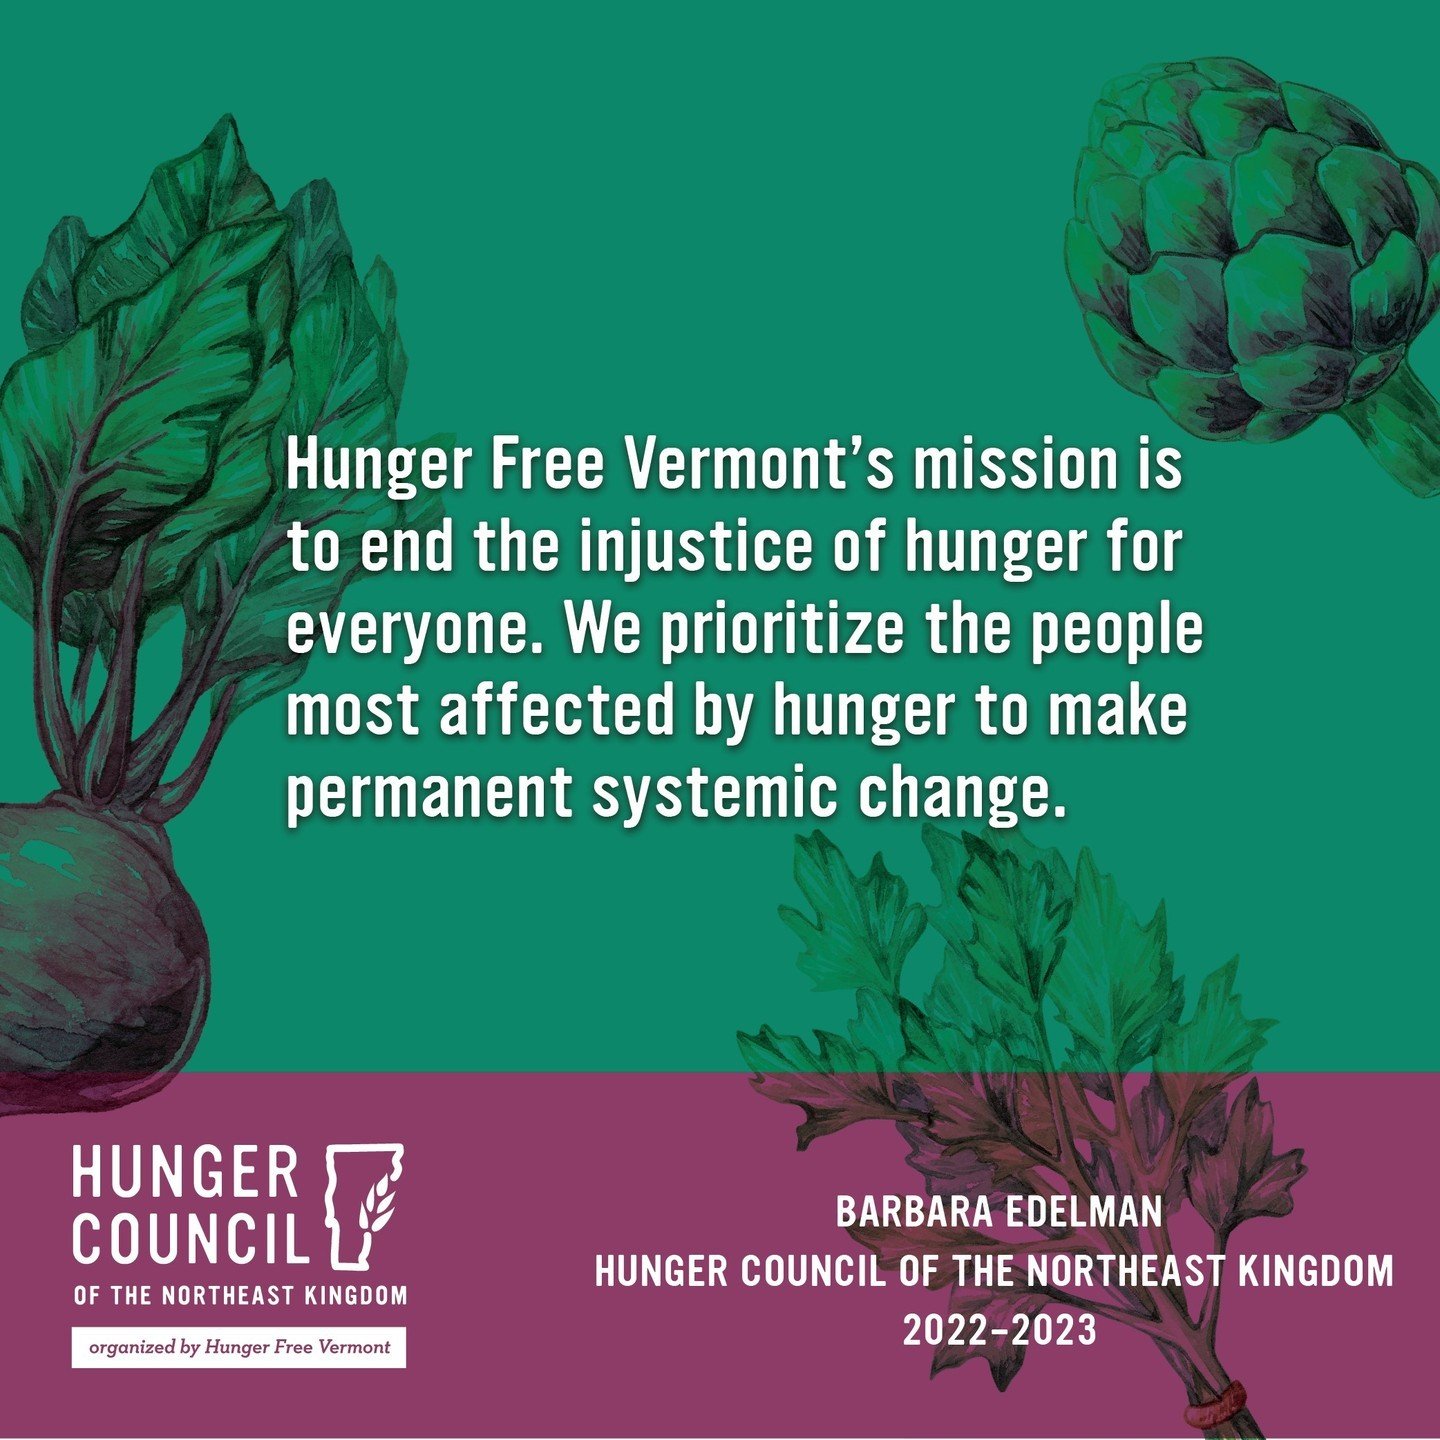 Thank you to our Northeast Kingdom Hunger Council Co-Chair, Barbara Edelman, for her service! 

Our Hunger Councils are a powerful force in addressing hunger in our Vermont communities. 

To learn more about your local hunger council, council members